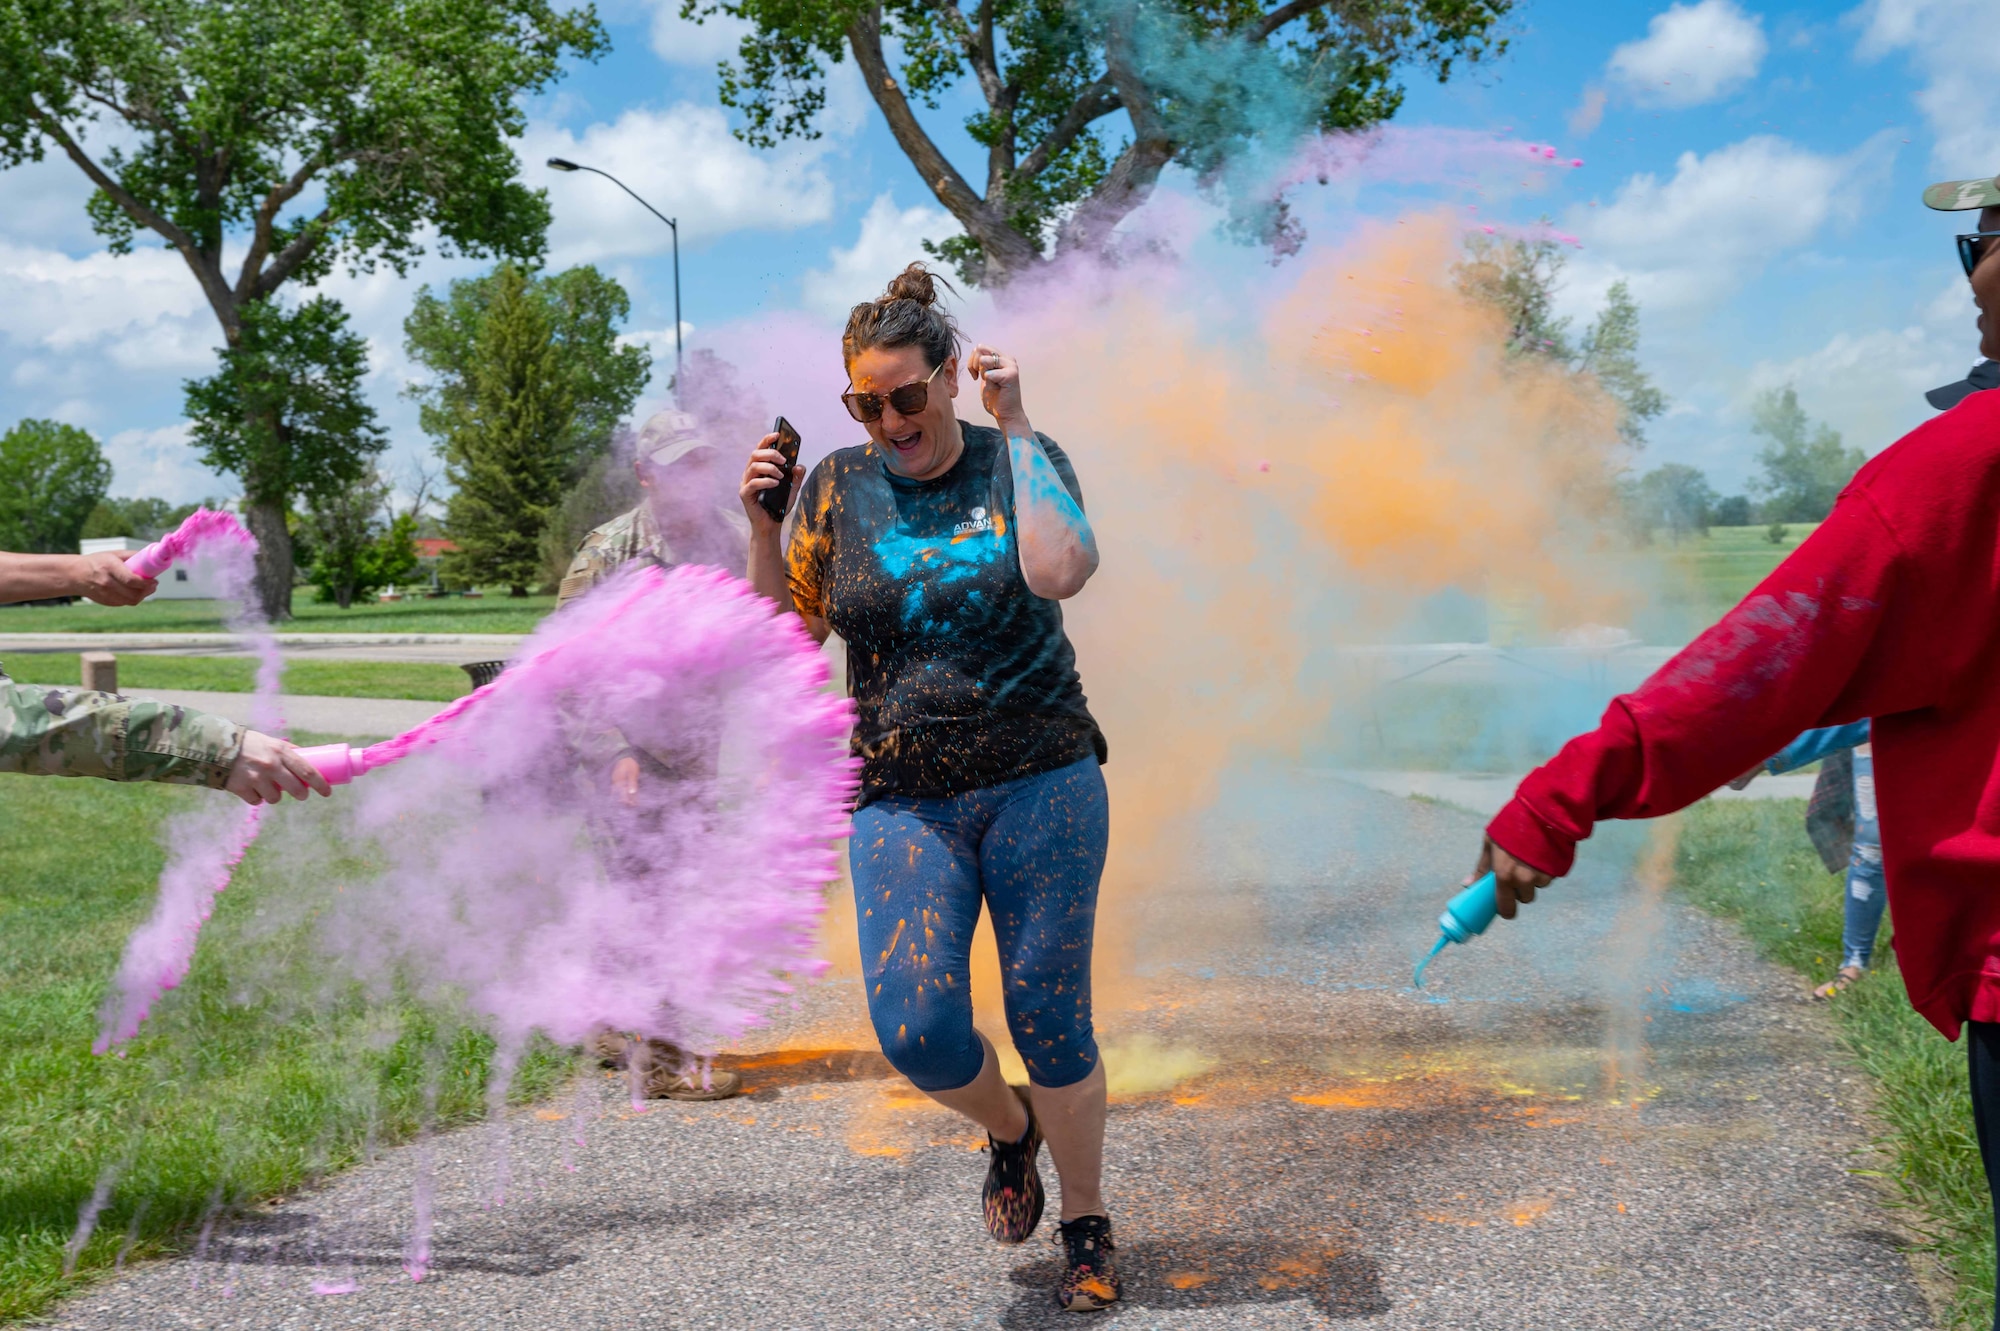 90th Missile Wing Airmen pose for a photo prior to a 5K color run at Argonne Parade Field on F.E. Warren Air Force Base, Wyoming, June 23, 2023. The color run was hosted to celebrate pride month. (U.S. Air Force photo by Senior Airman Sarah Post)